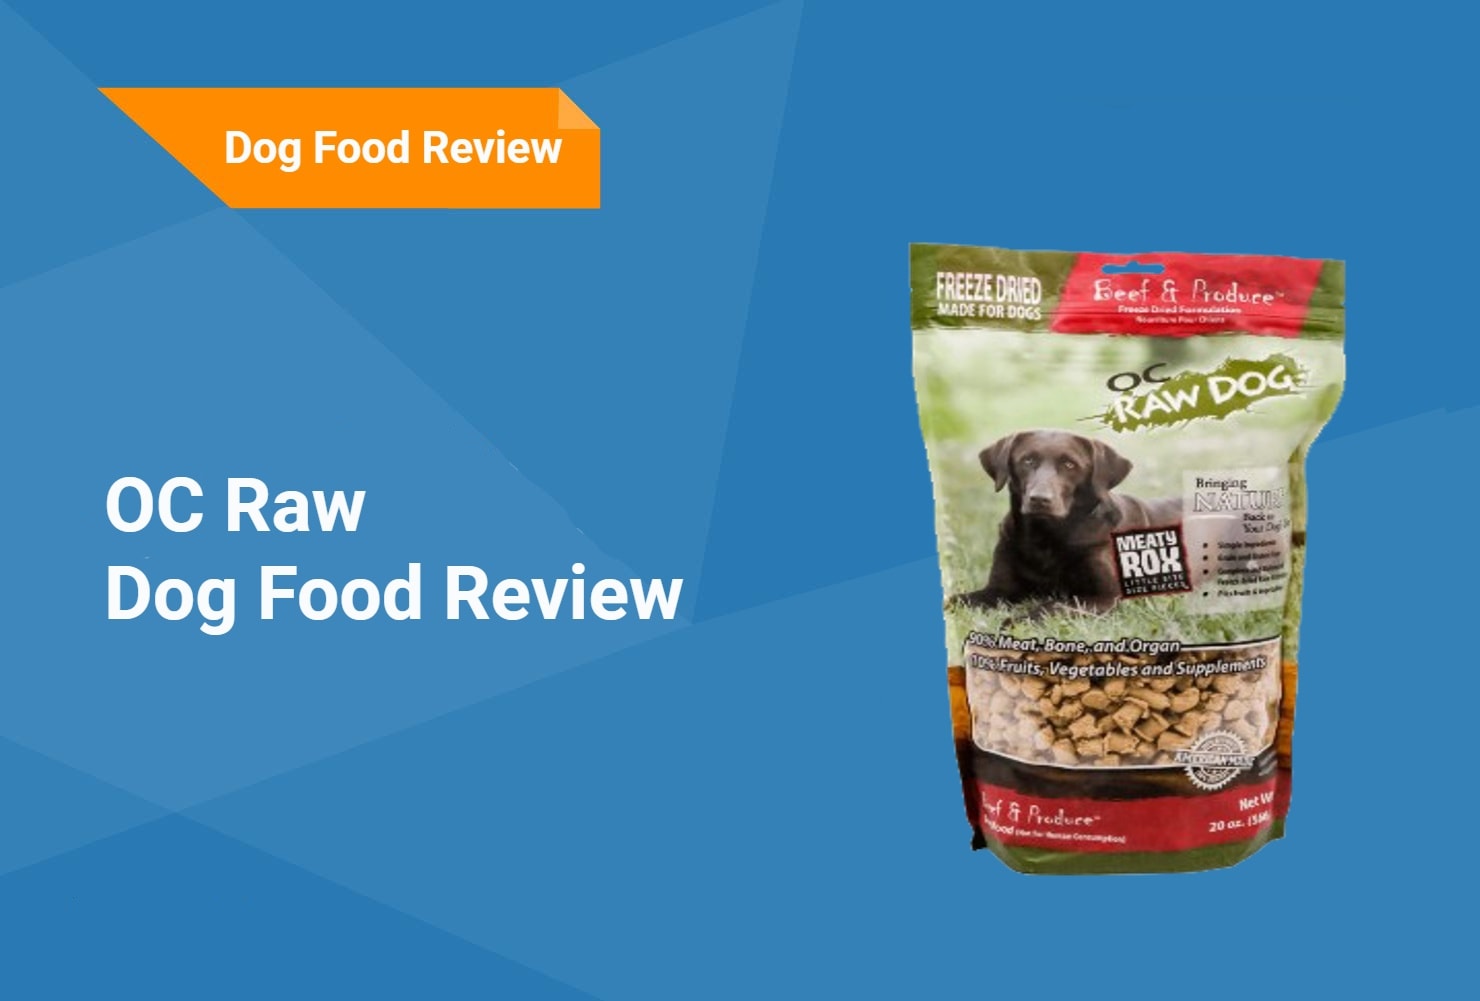 oc raw Dog Food Review